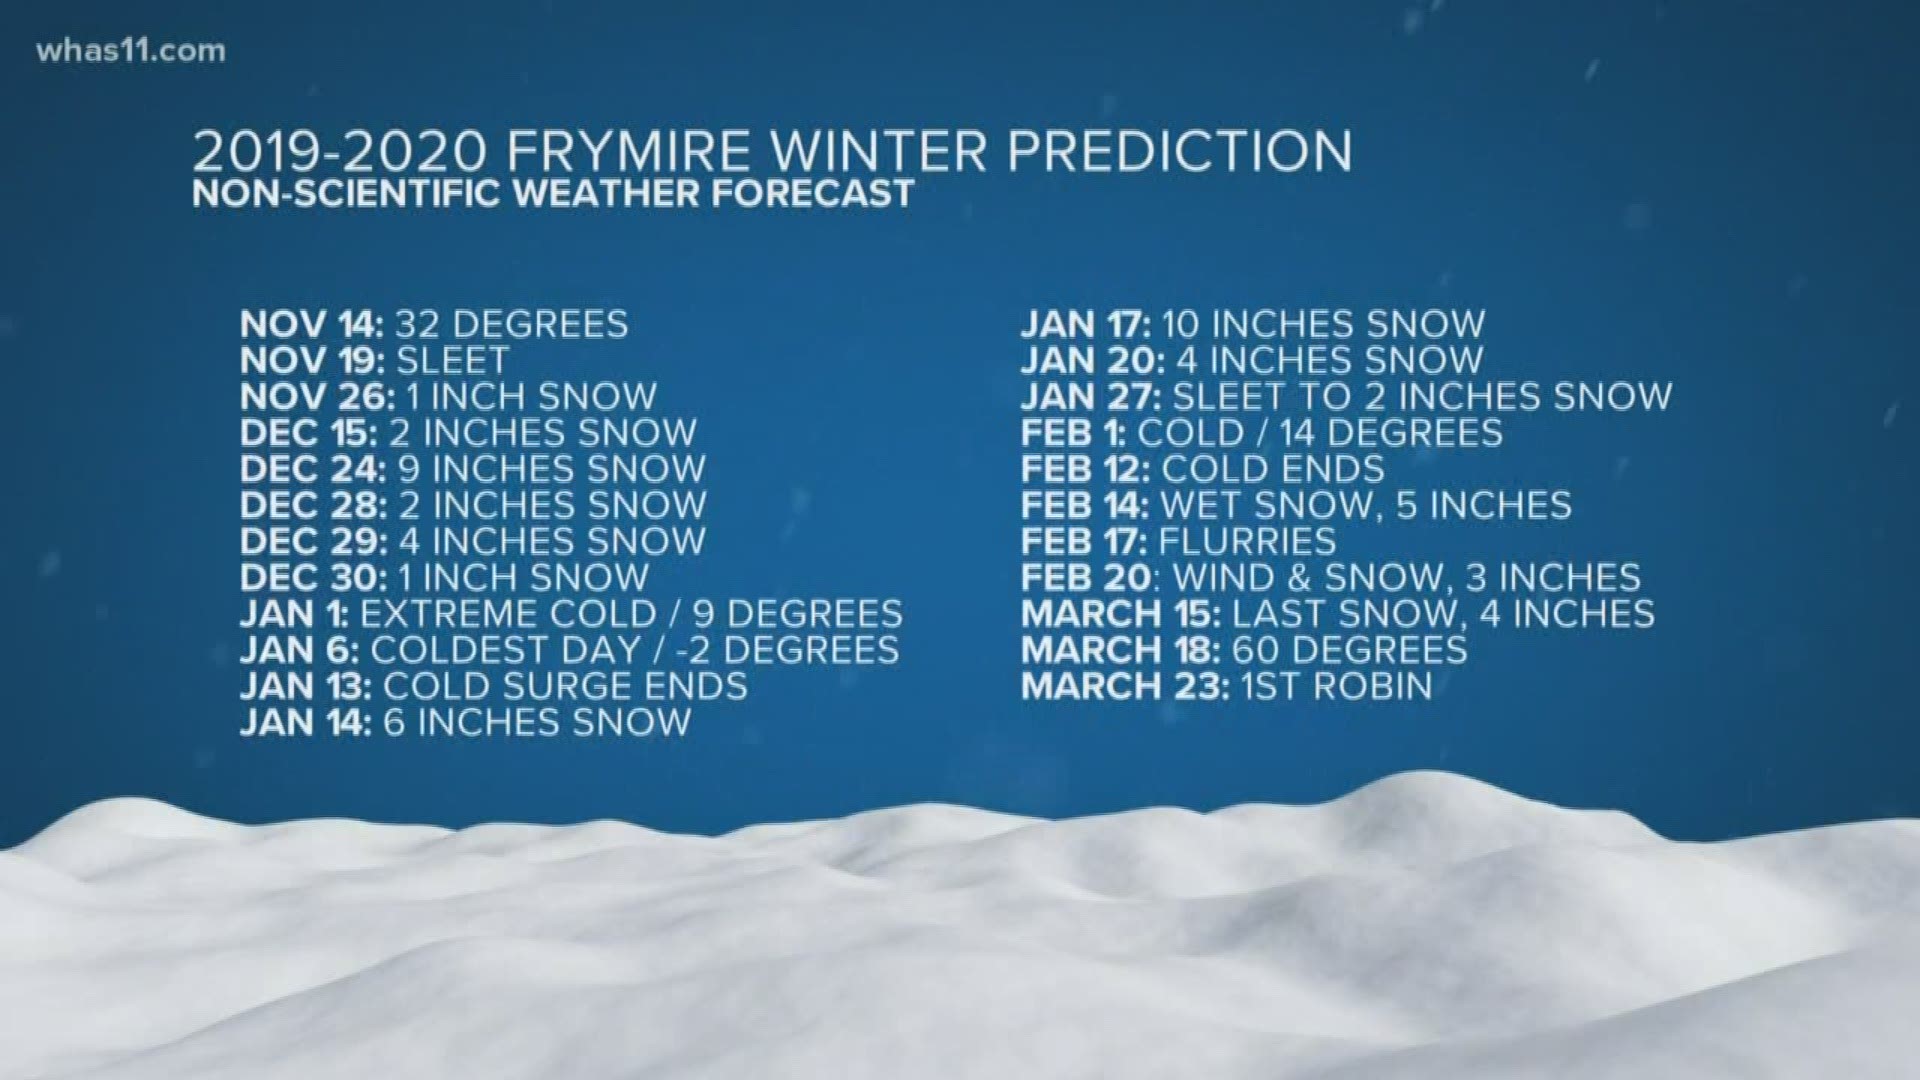 A tradition as old as "Bellavia" being played on WHAS11's snow closings, Dick Frymire made predictions from 1979 until 2013.